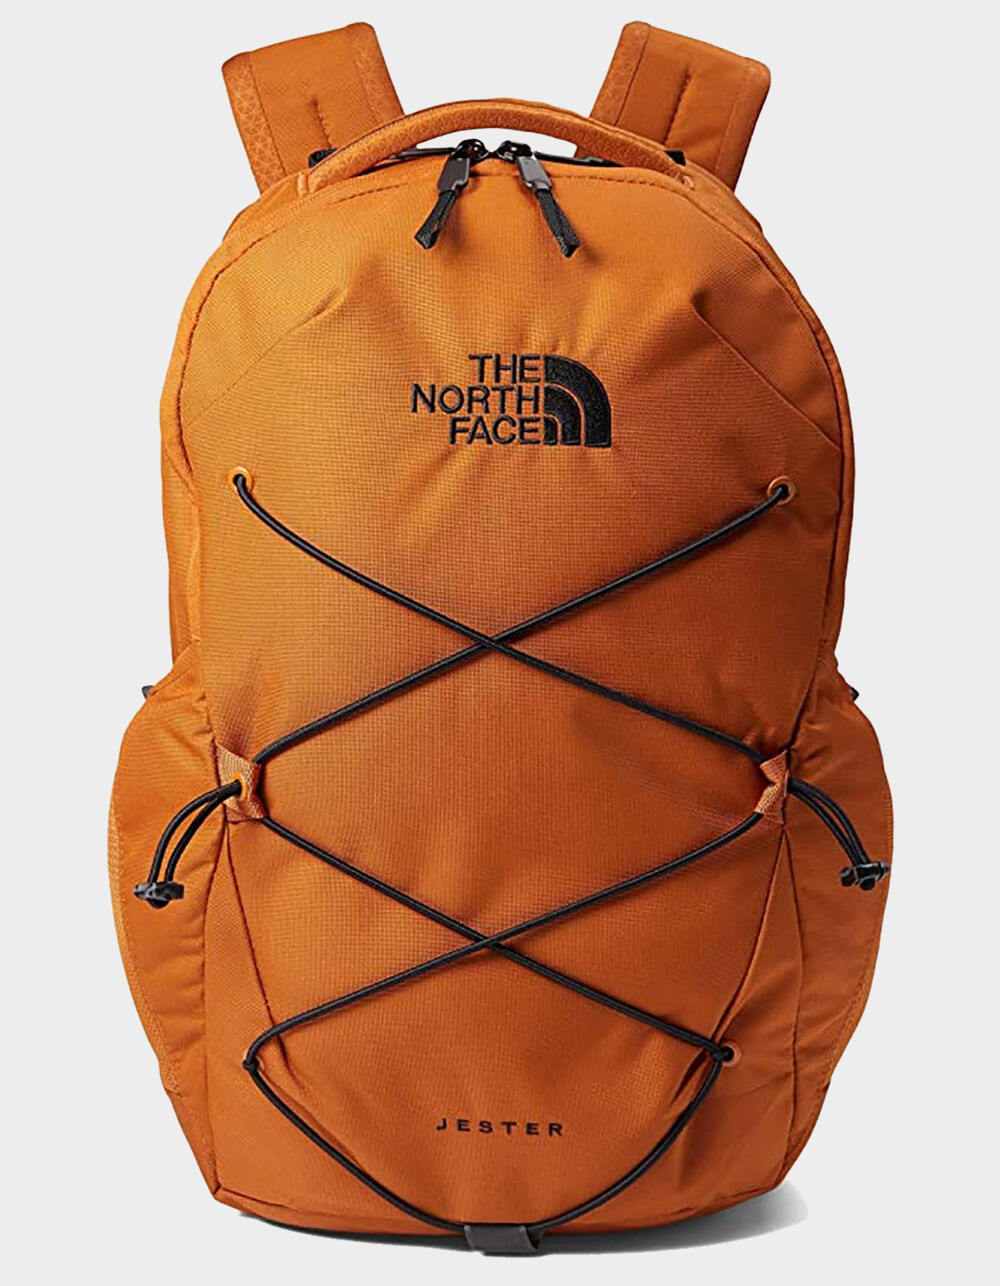 THE NORTH FACE Jester Backpack - LEATHER BROWN | Tillys